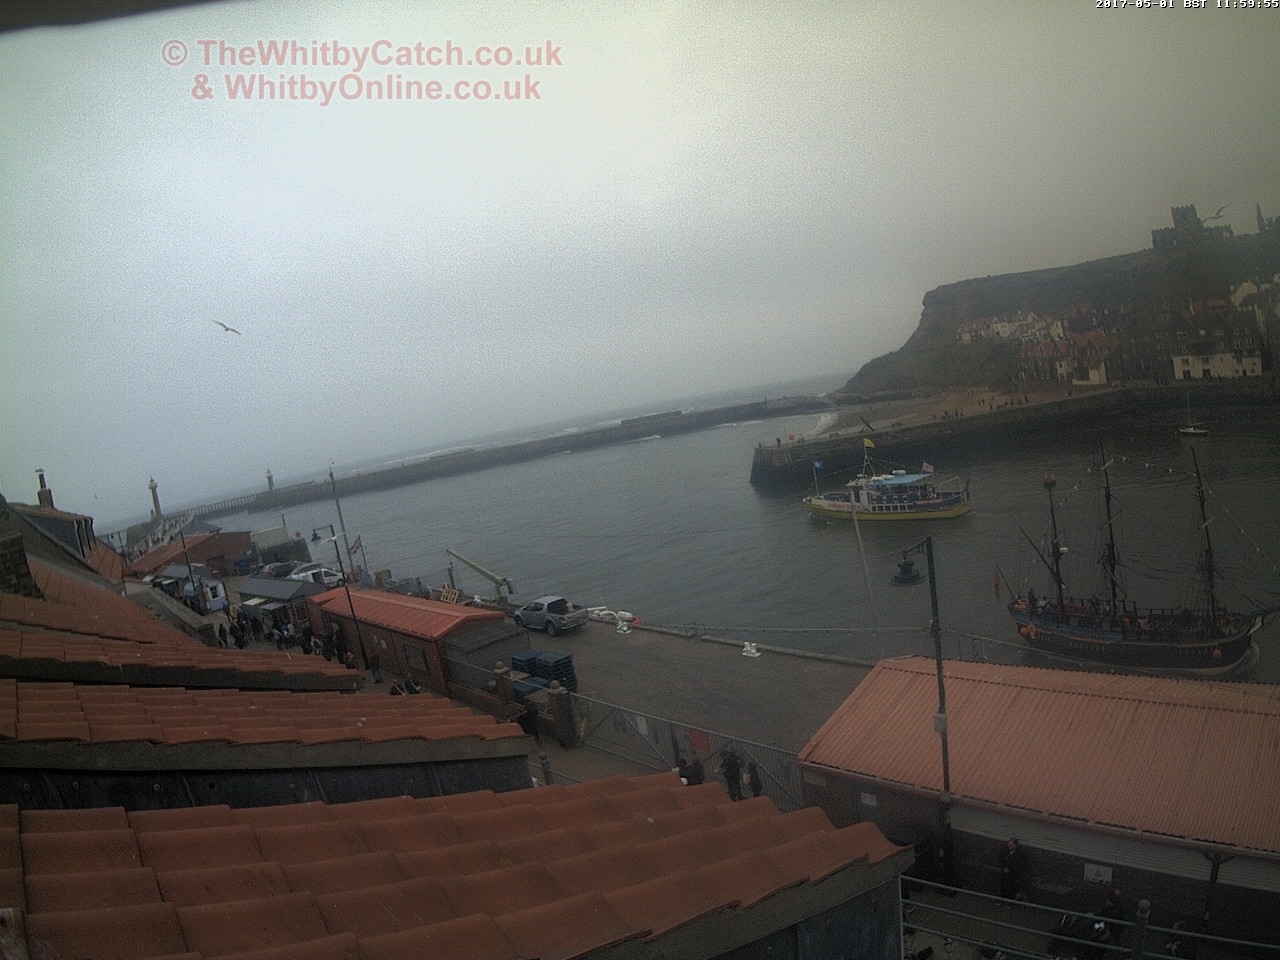 Whitby Mon 1st May 2017 12:00.